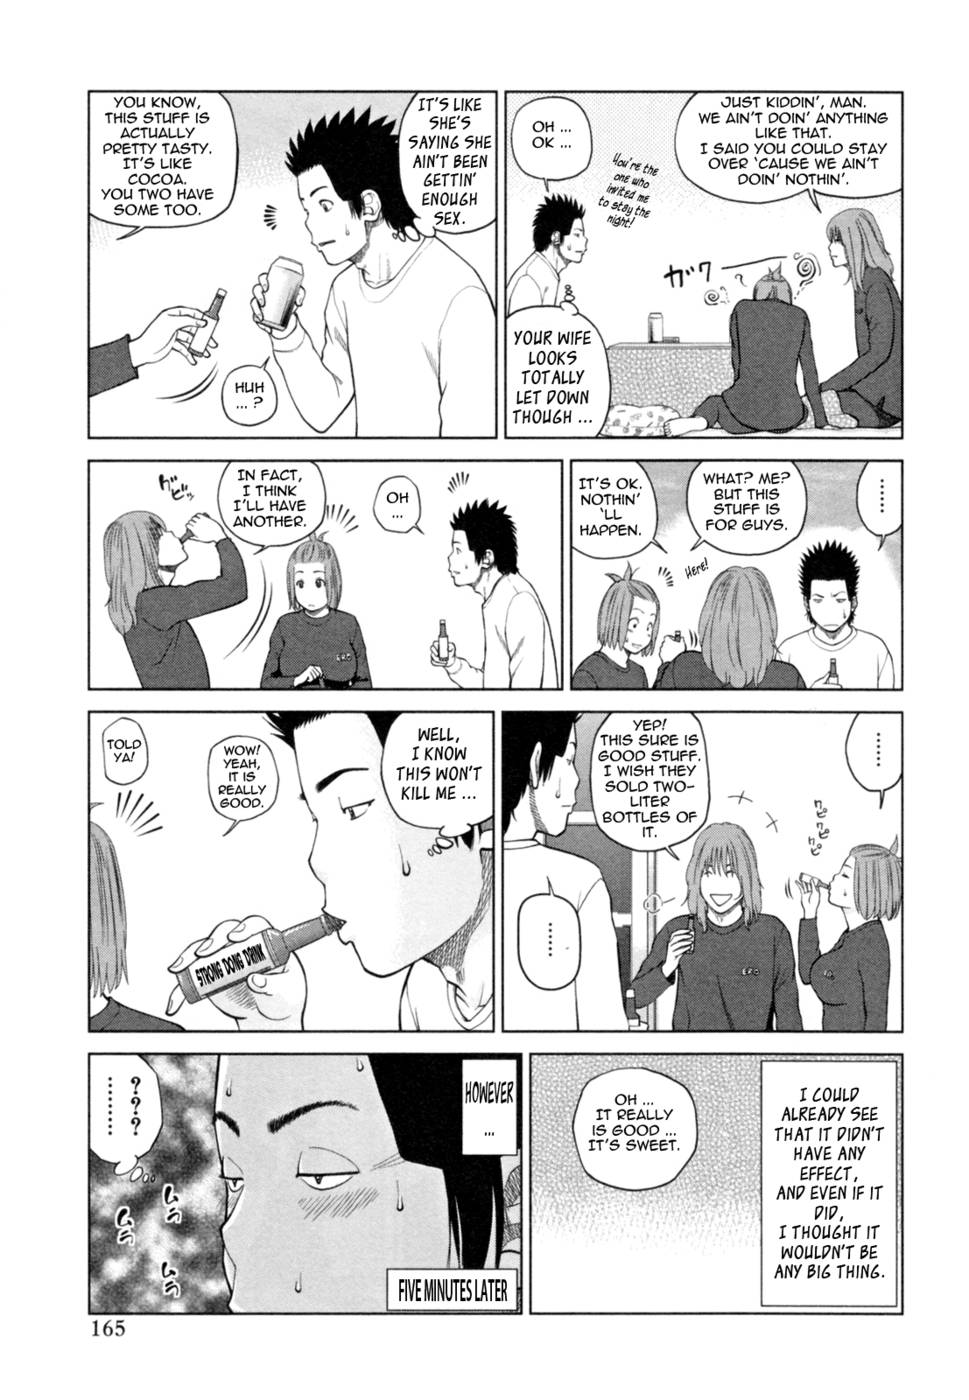 32 Year Old Unsatisfied Wife-Chapter 9-Strong Dong Drink-Hentai Manga Hentai Comic